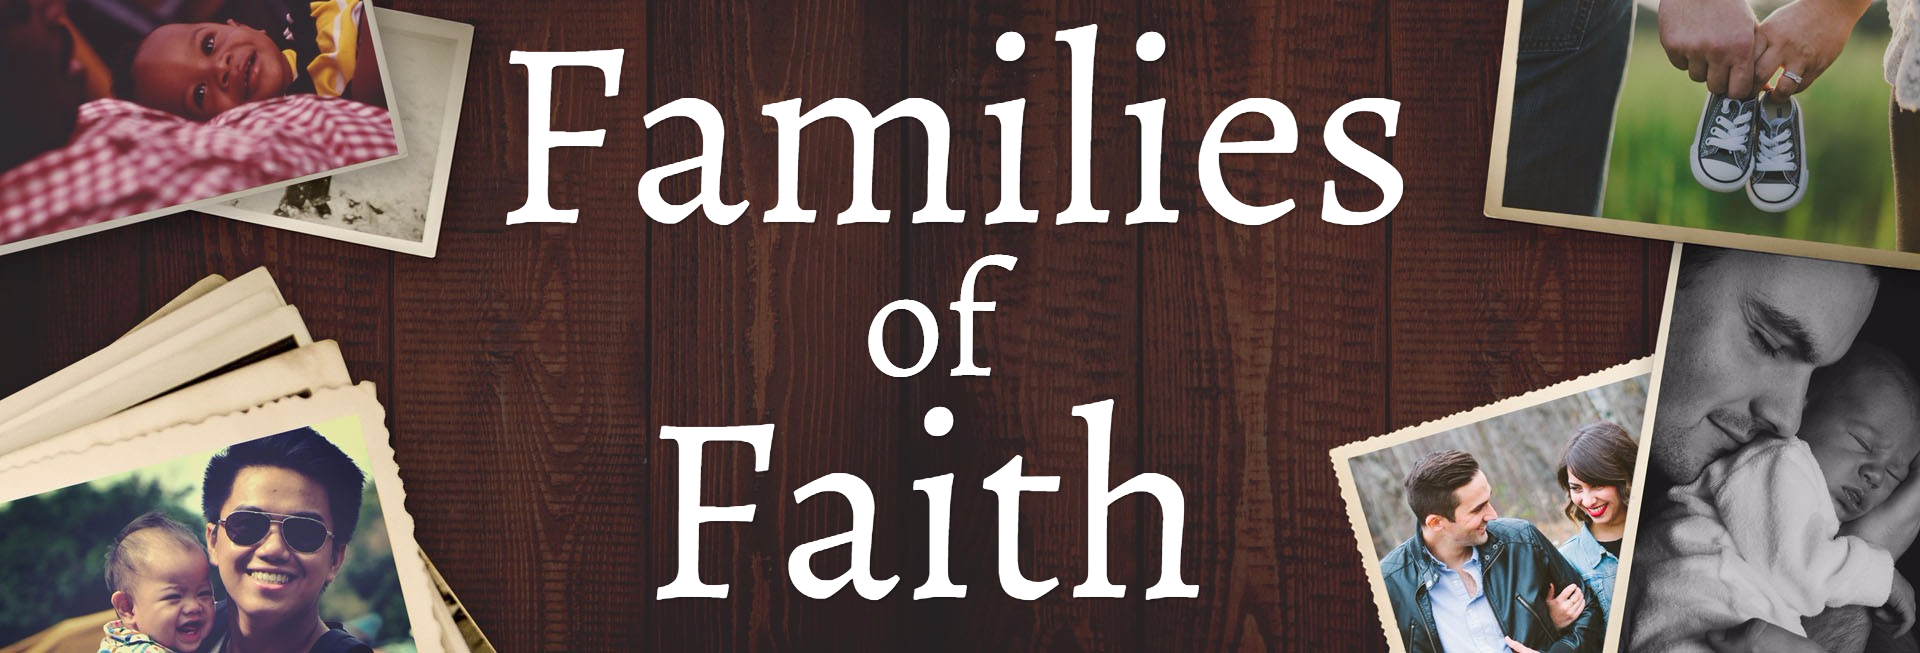 Father's Day Photos Church Website Banner